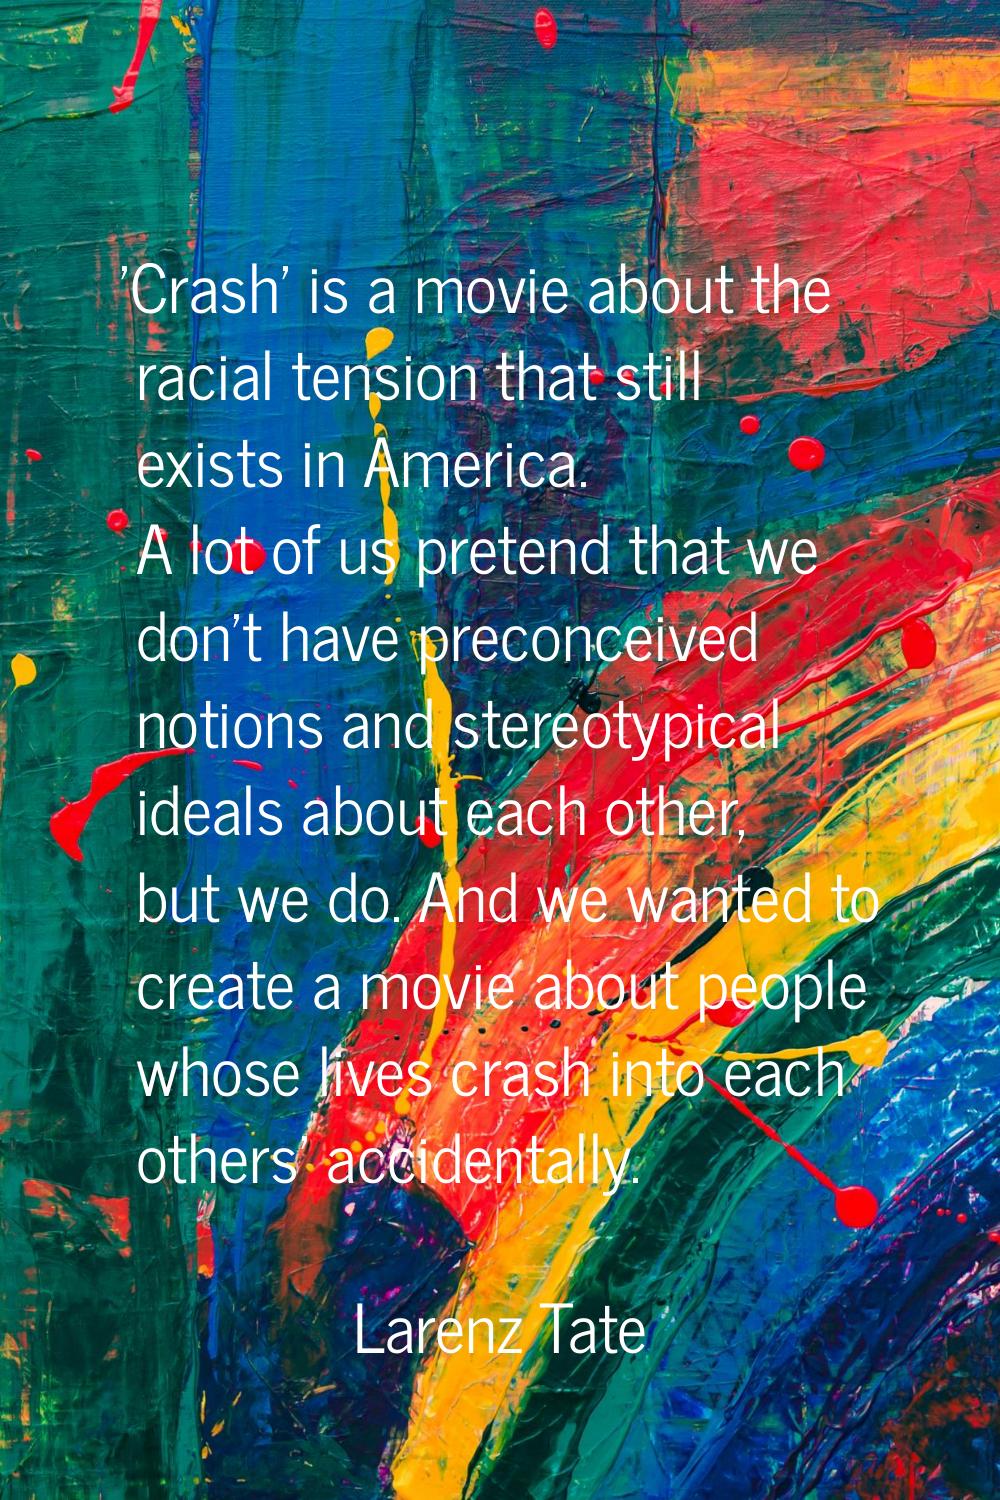 'Crash' is a movie about the racial tension that still exists in America. A lot of us pretend that 